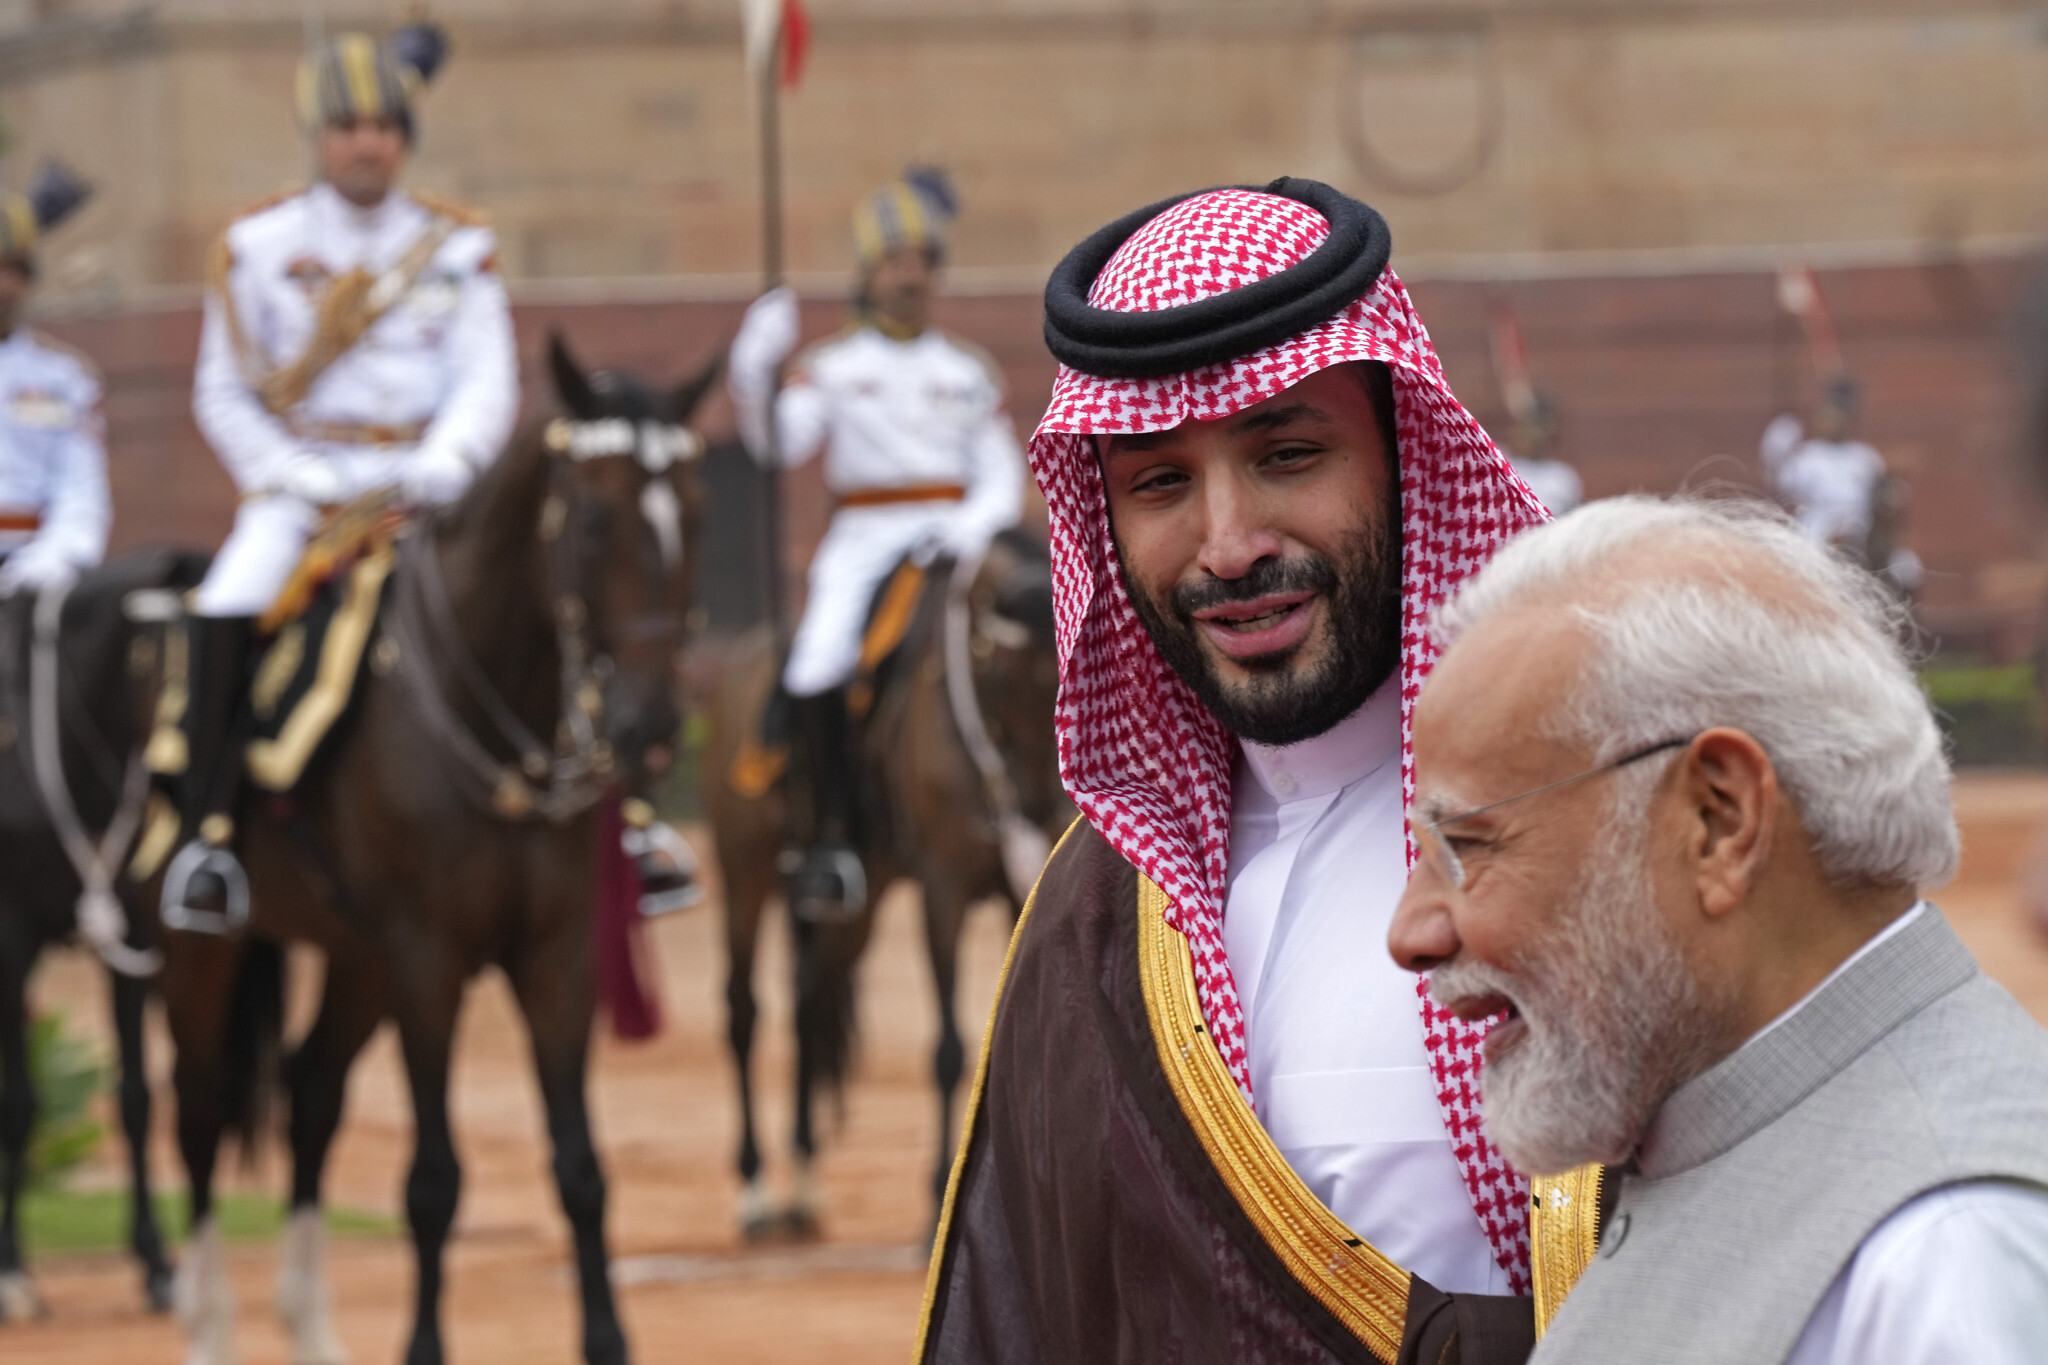 Saudi Arab Download X Video - India and Saudi Arabia announce agreement to expand economic, security ties  | The Times of Israel